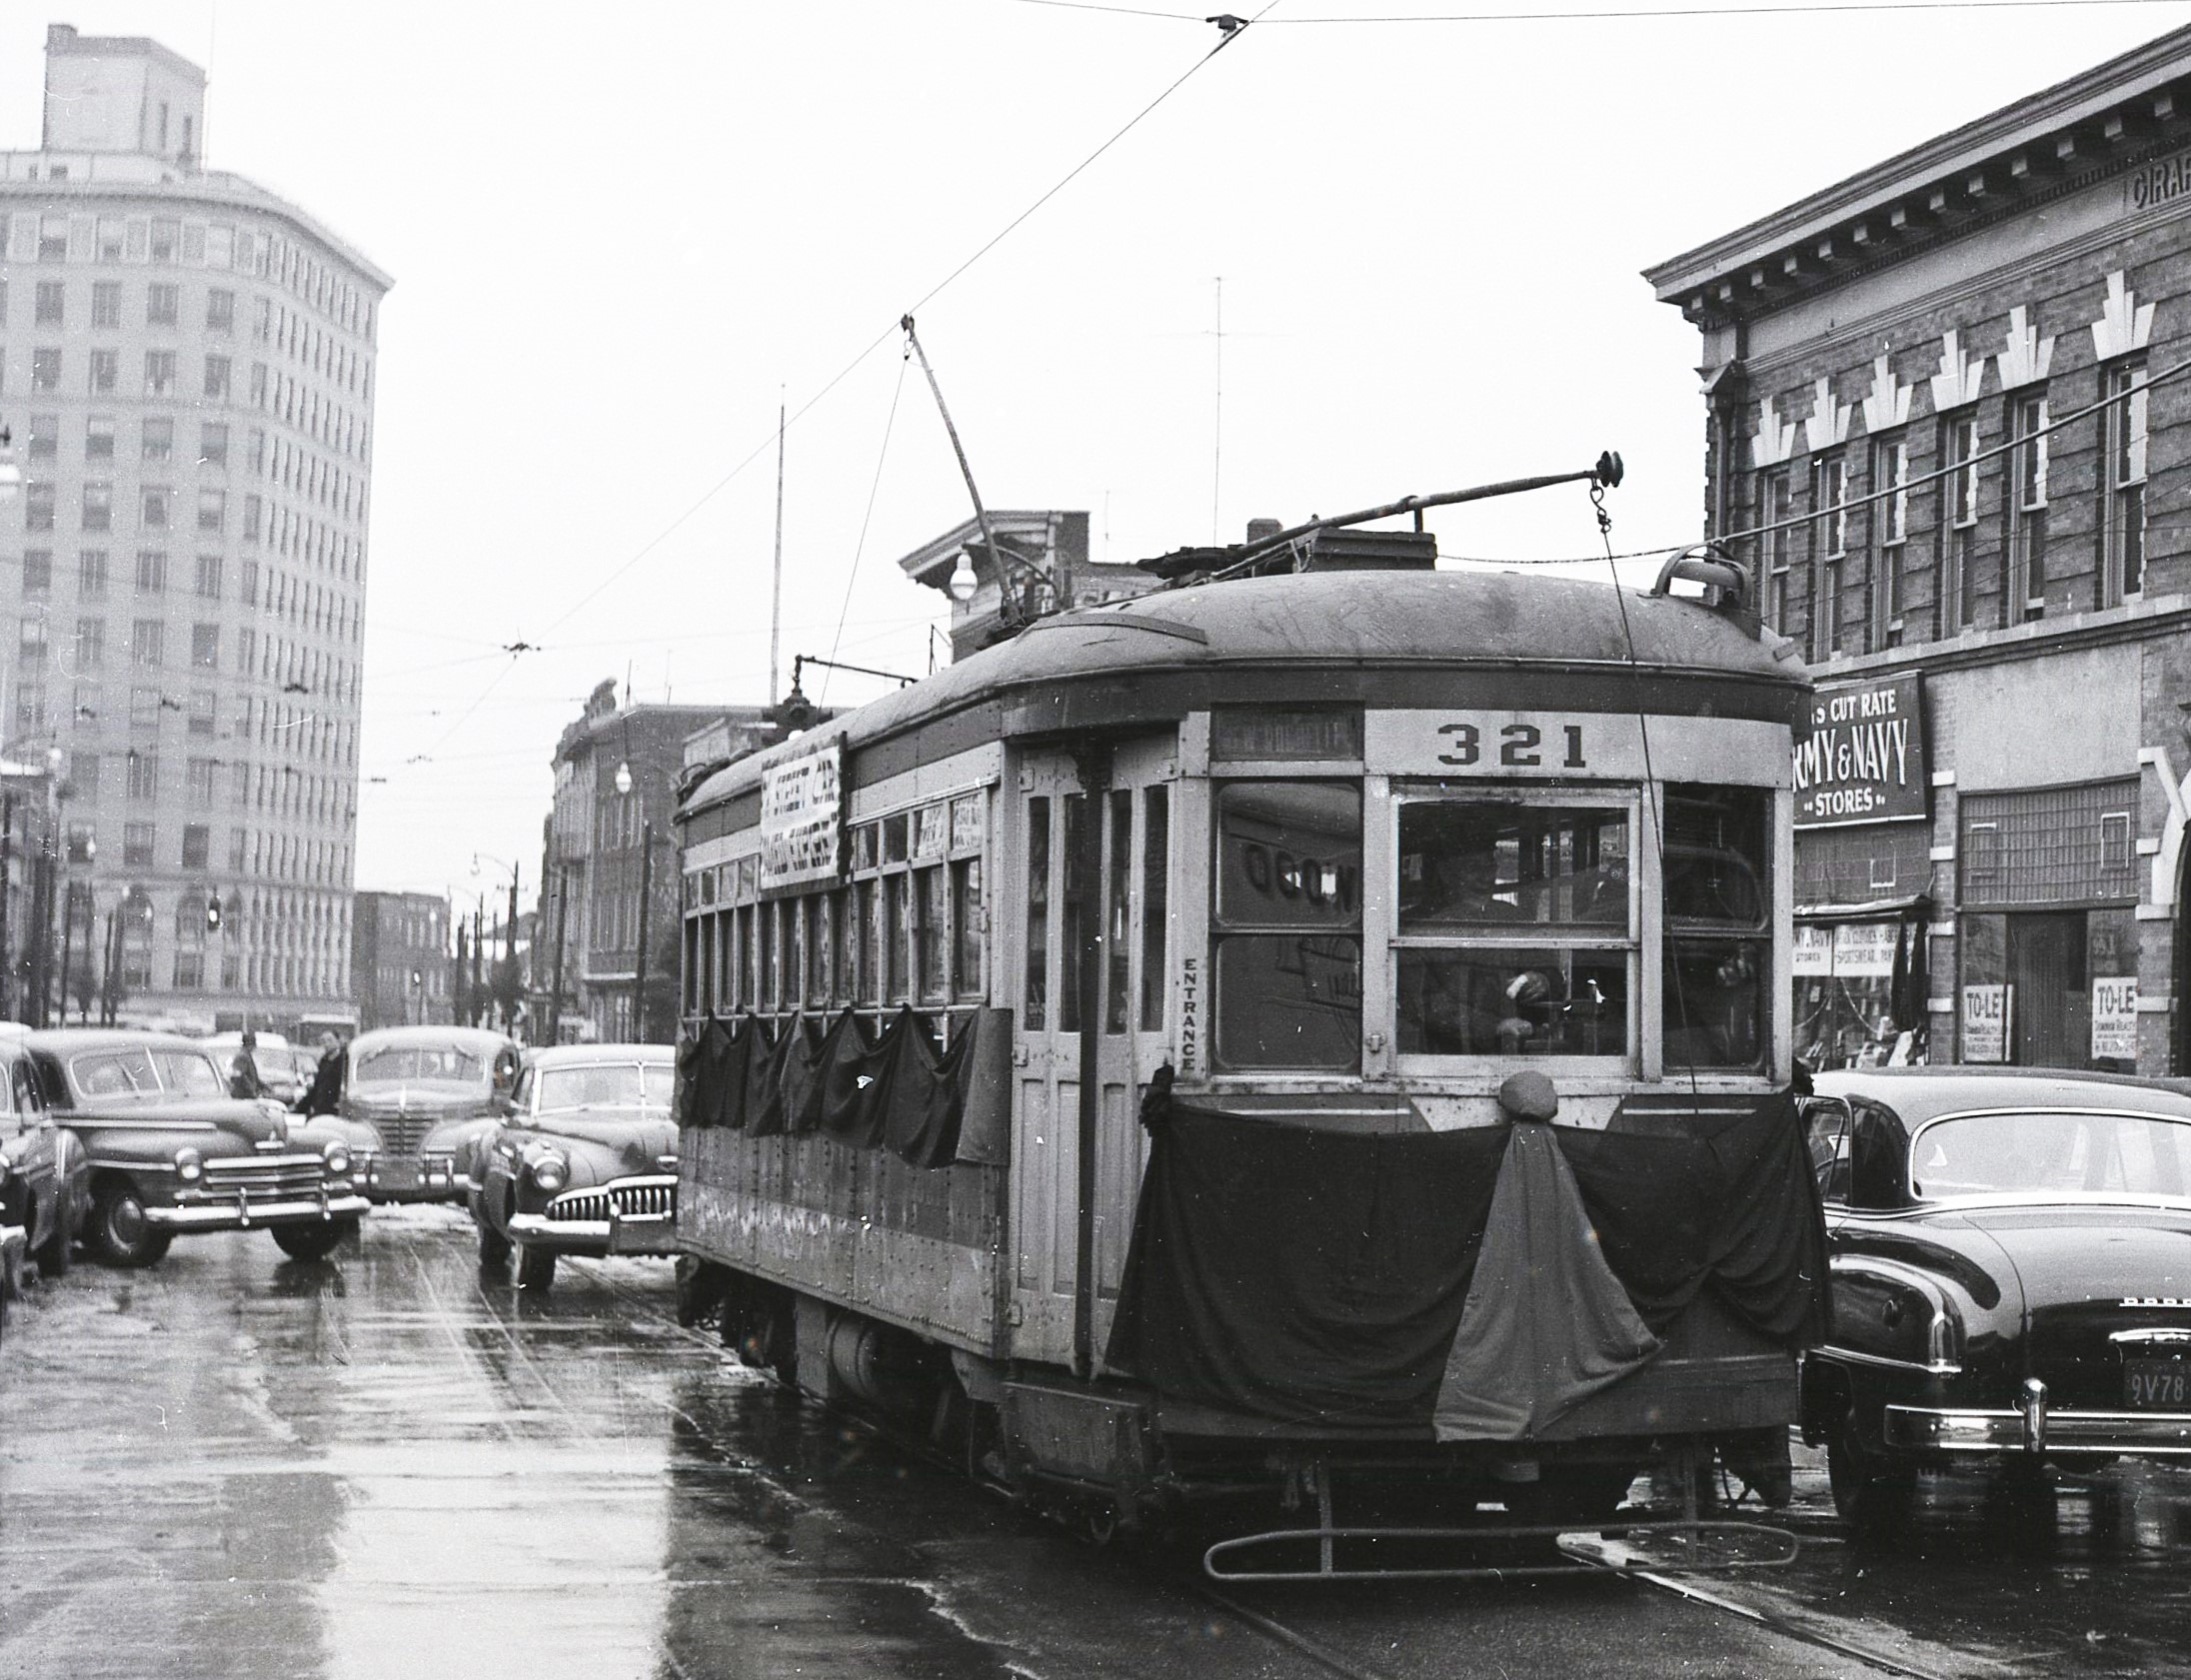 Third Avenue Railway System | TARS | New Rochelle, New York | Car 321| Route A | last day of trolley service | December 16, 1950 | Fielding Lew Bowman photograph